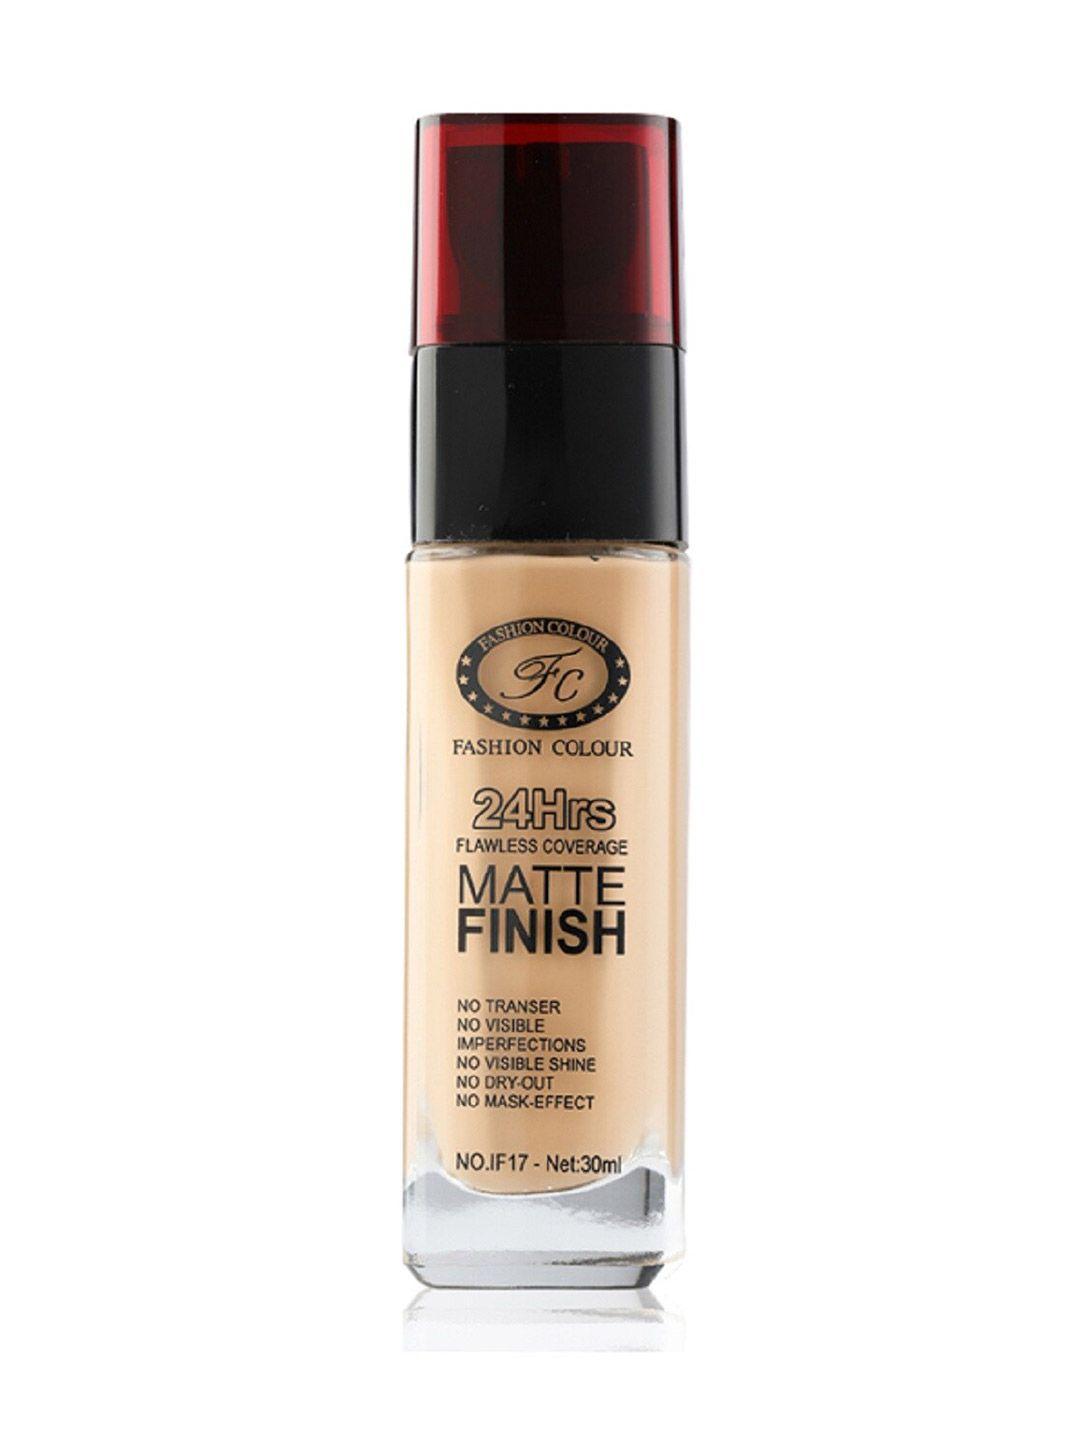 fashion-colour-24hrs-flawless-coverage-no-transfer-matte-finish-foundation-30ml---shade-03